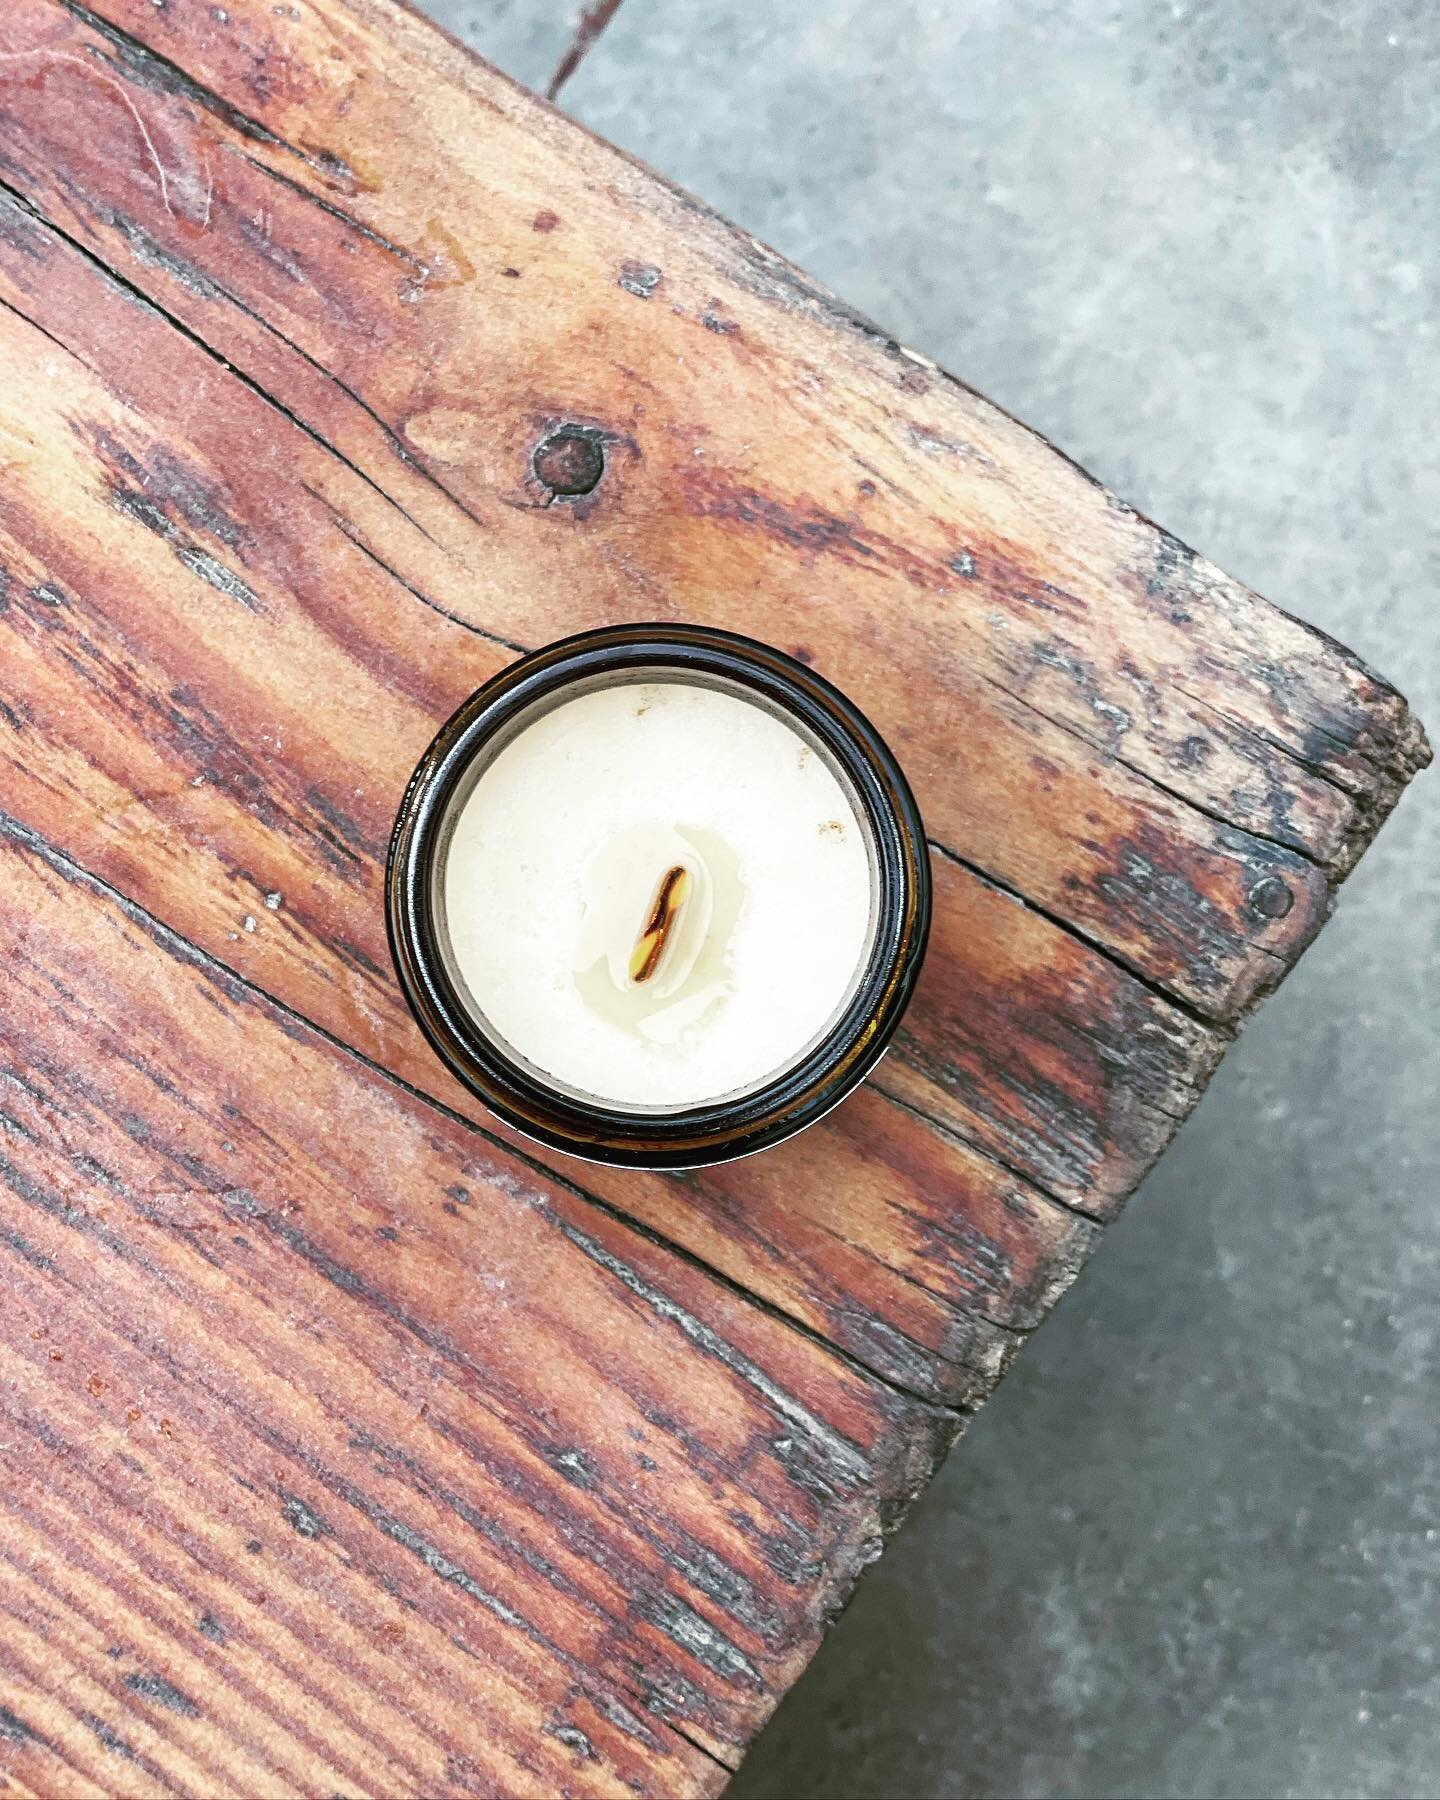 Burning candles in the daytime like we just like the scent or something&hellip; ✌🏻

Sandalwood + Frankincense - earthy, soft, and exotic. 🔥